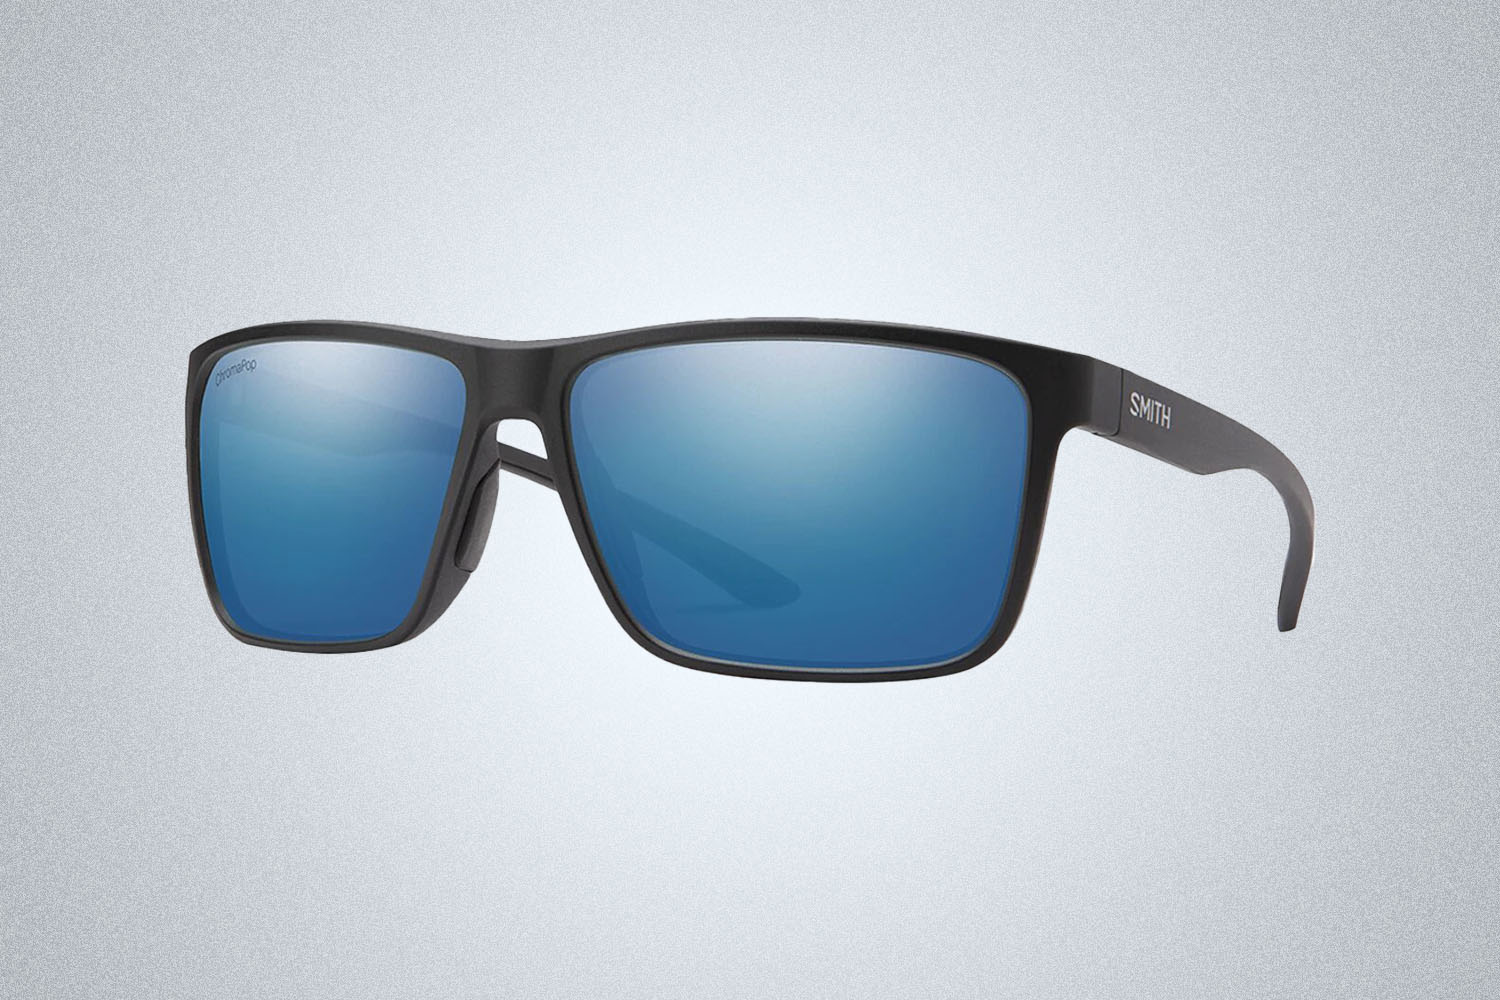 a pair of polarized, blue-lensed black sunglasses from Smith on a grey background